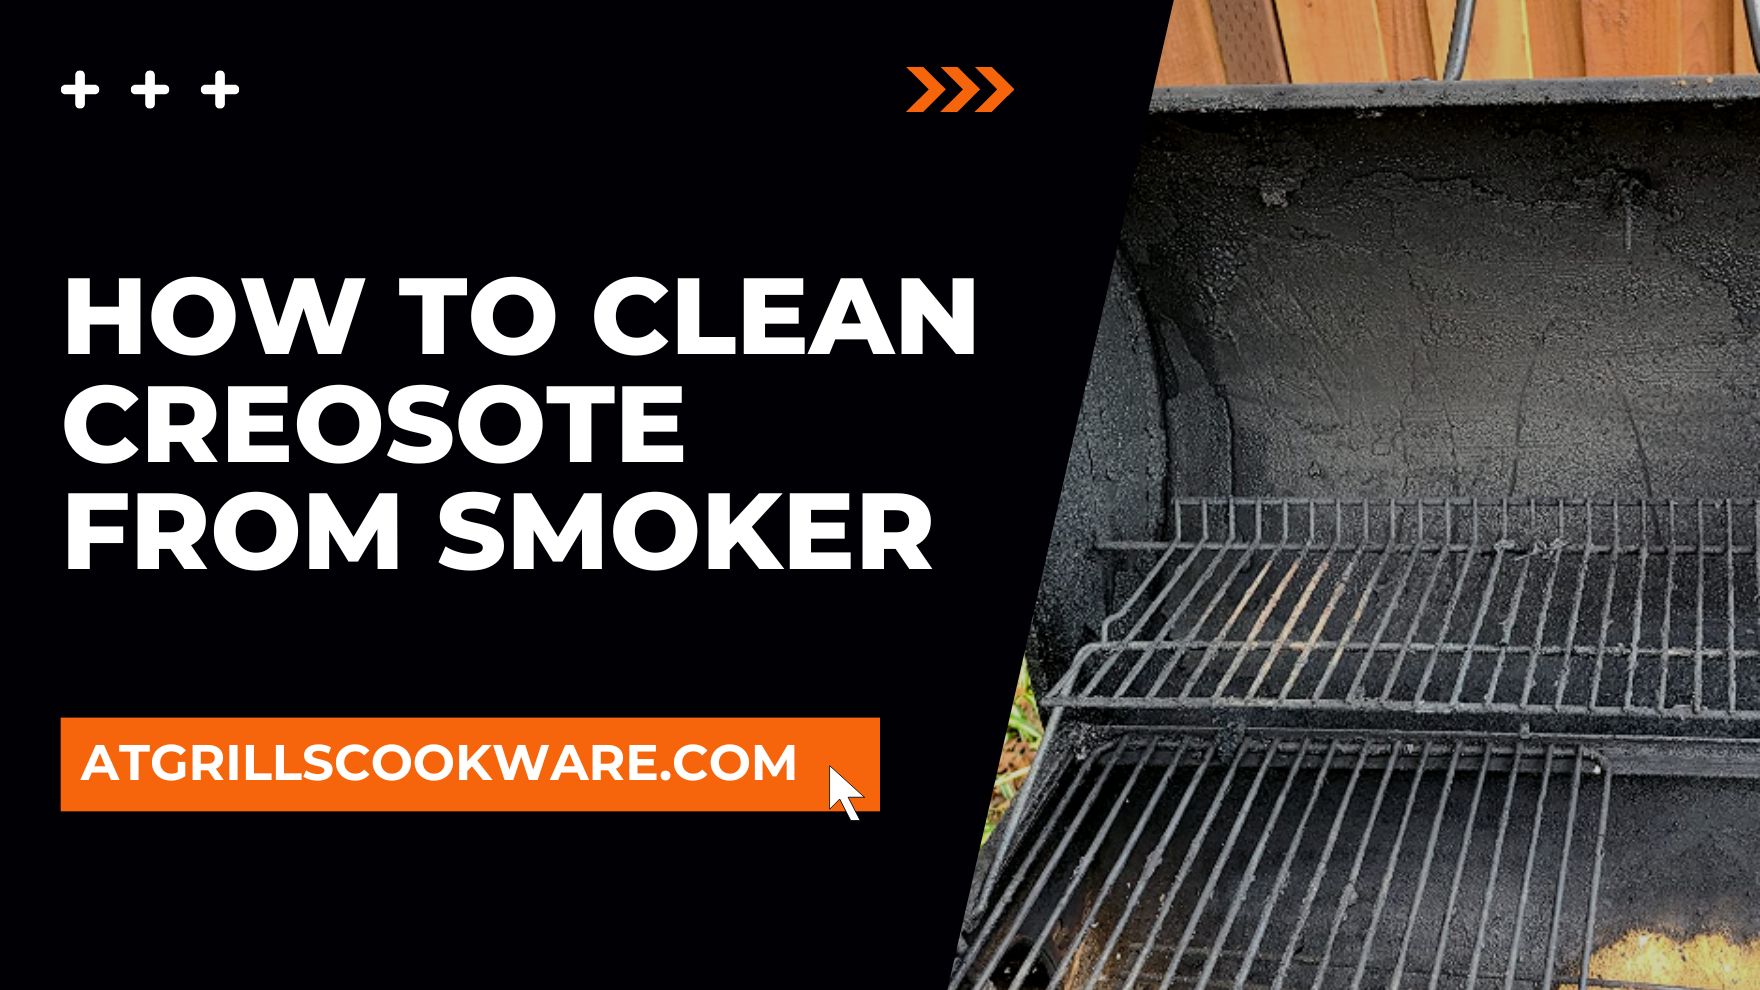 How To Clean Creosote From Smoker